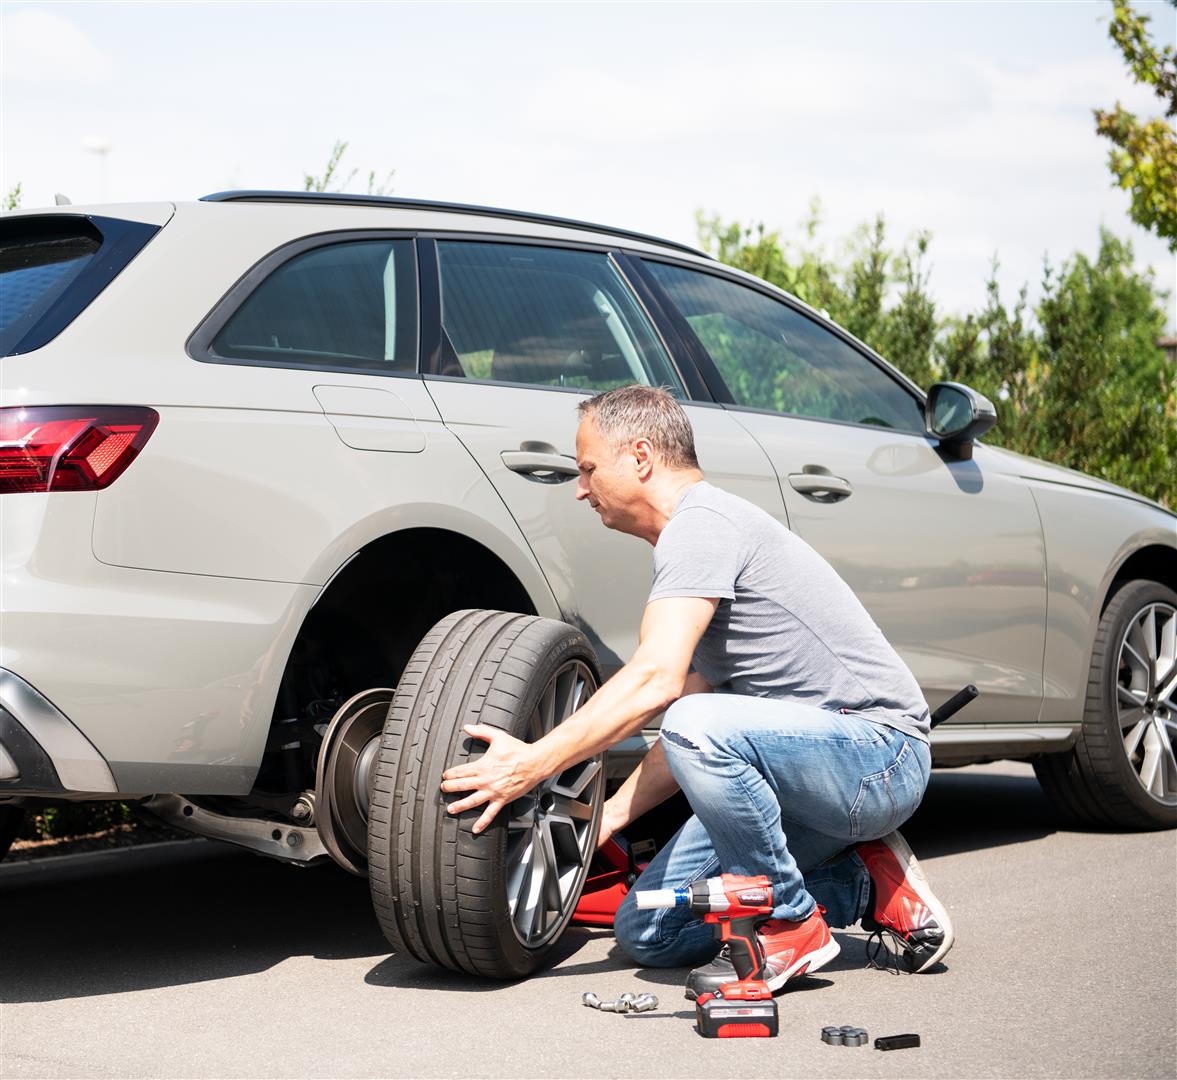 a man removes the tires from his car